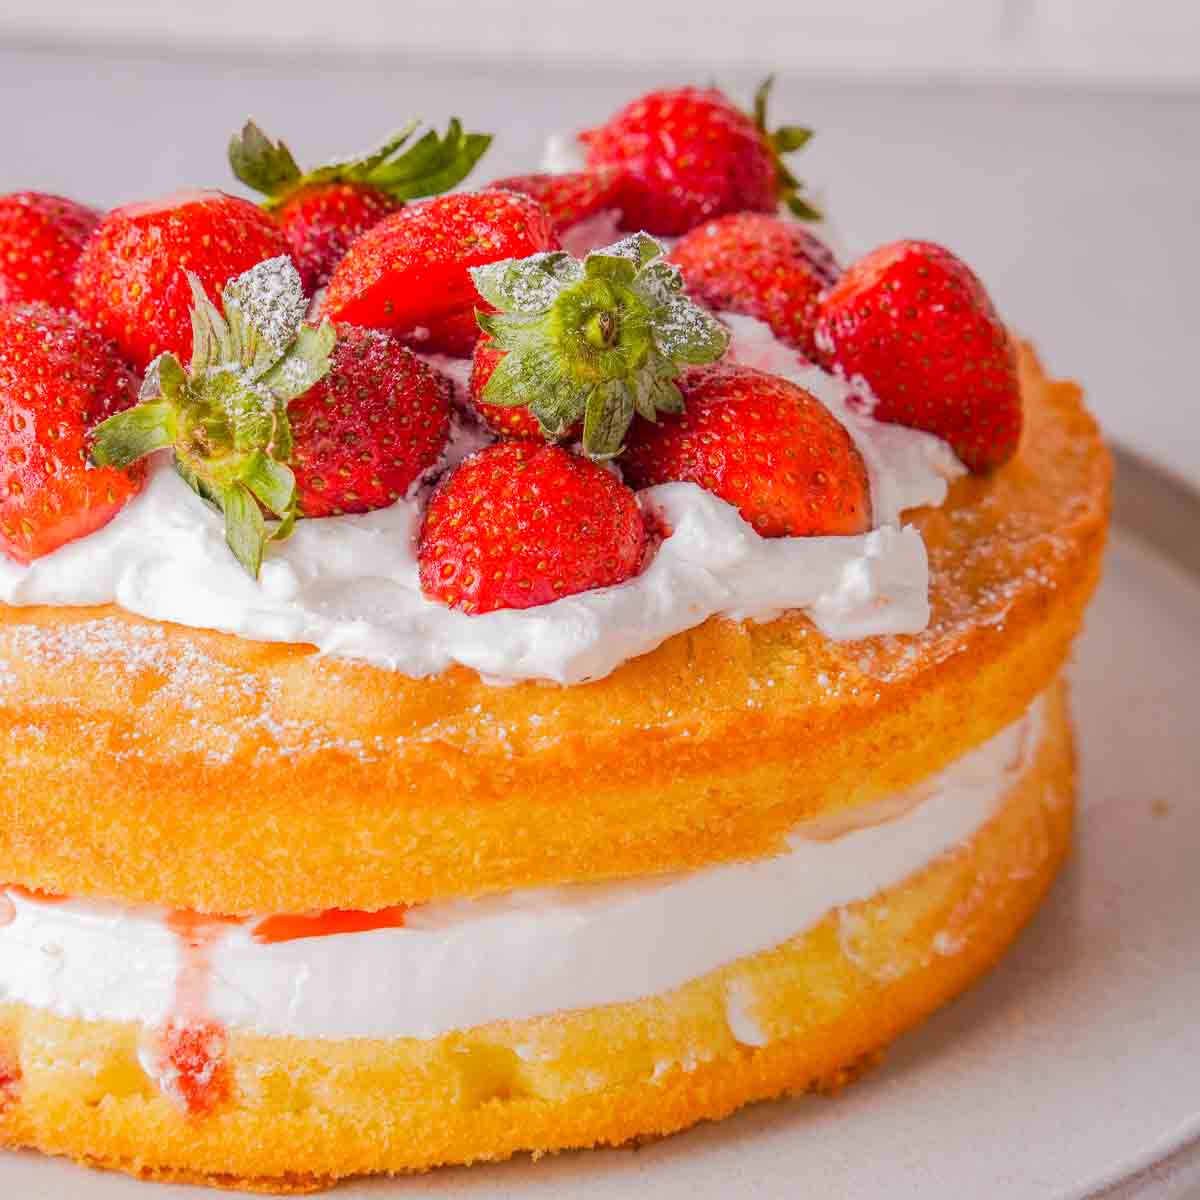 A Victoria Sponge Cake with strawberries on a white platter.